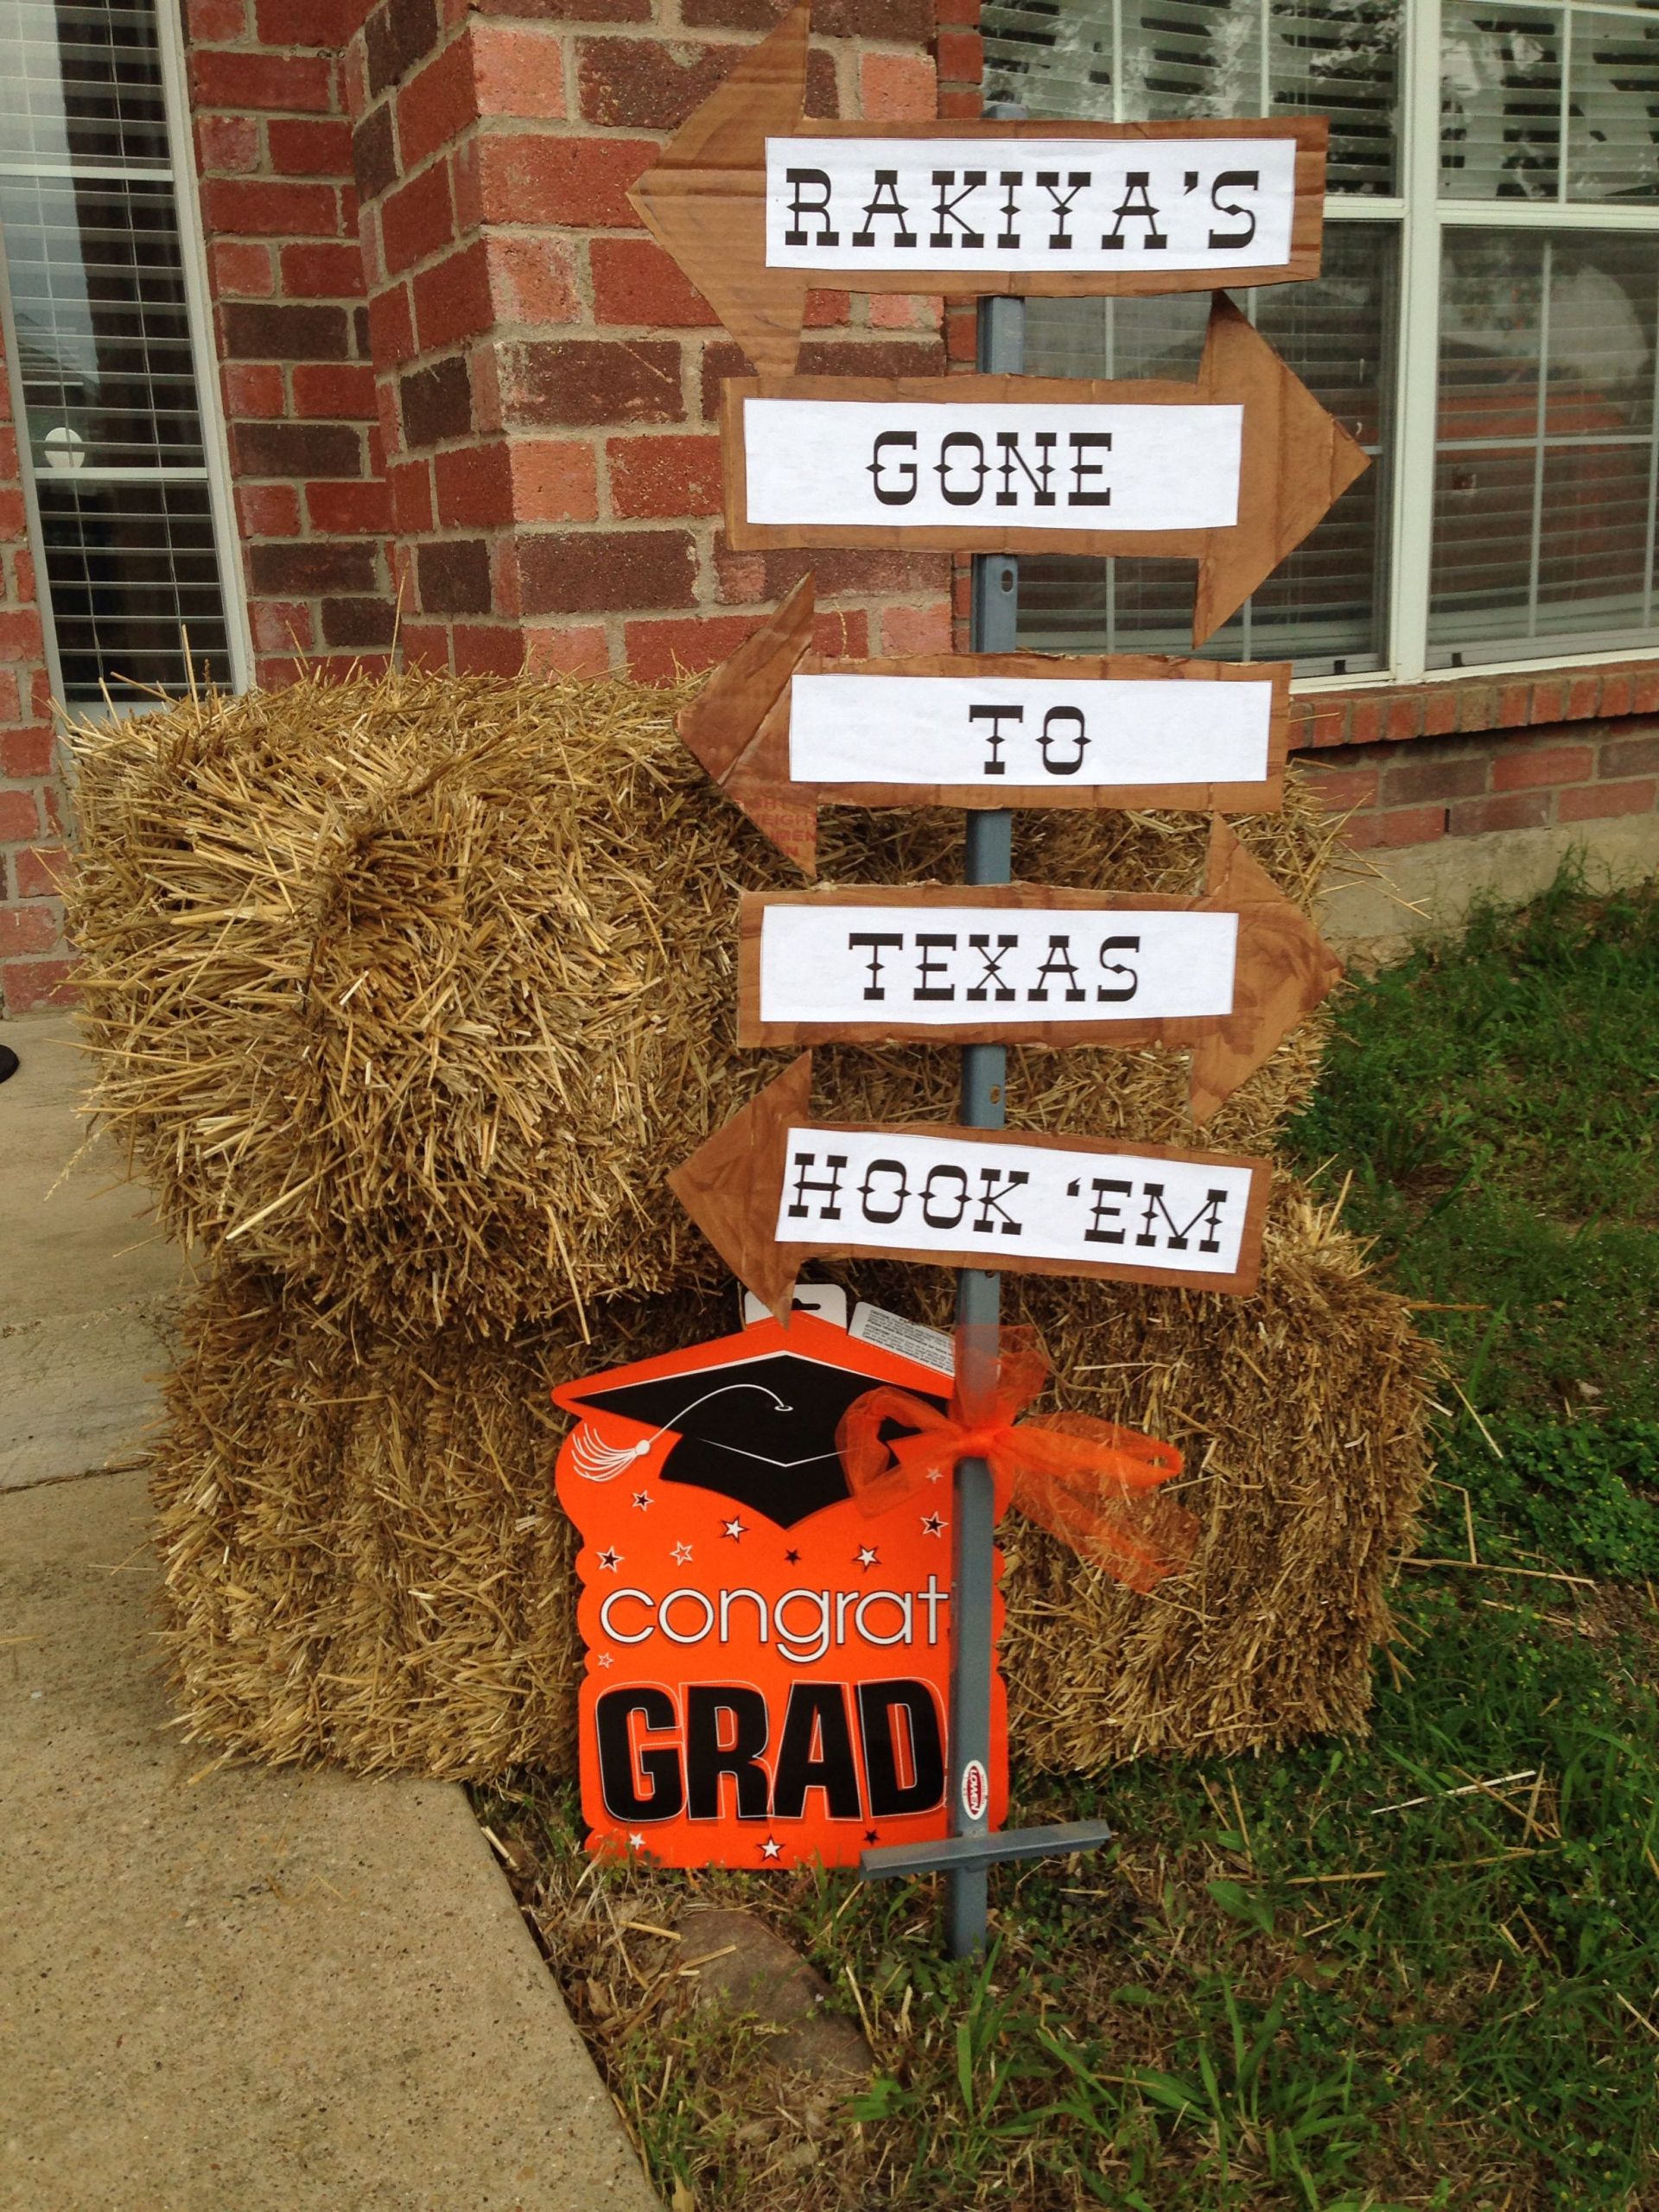 Western Graduation Party Ideas
 Western Themed Graduation Party "Gone to Texas"